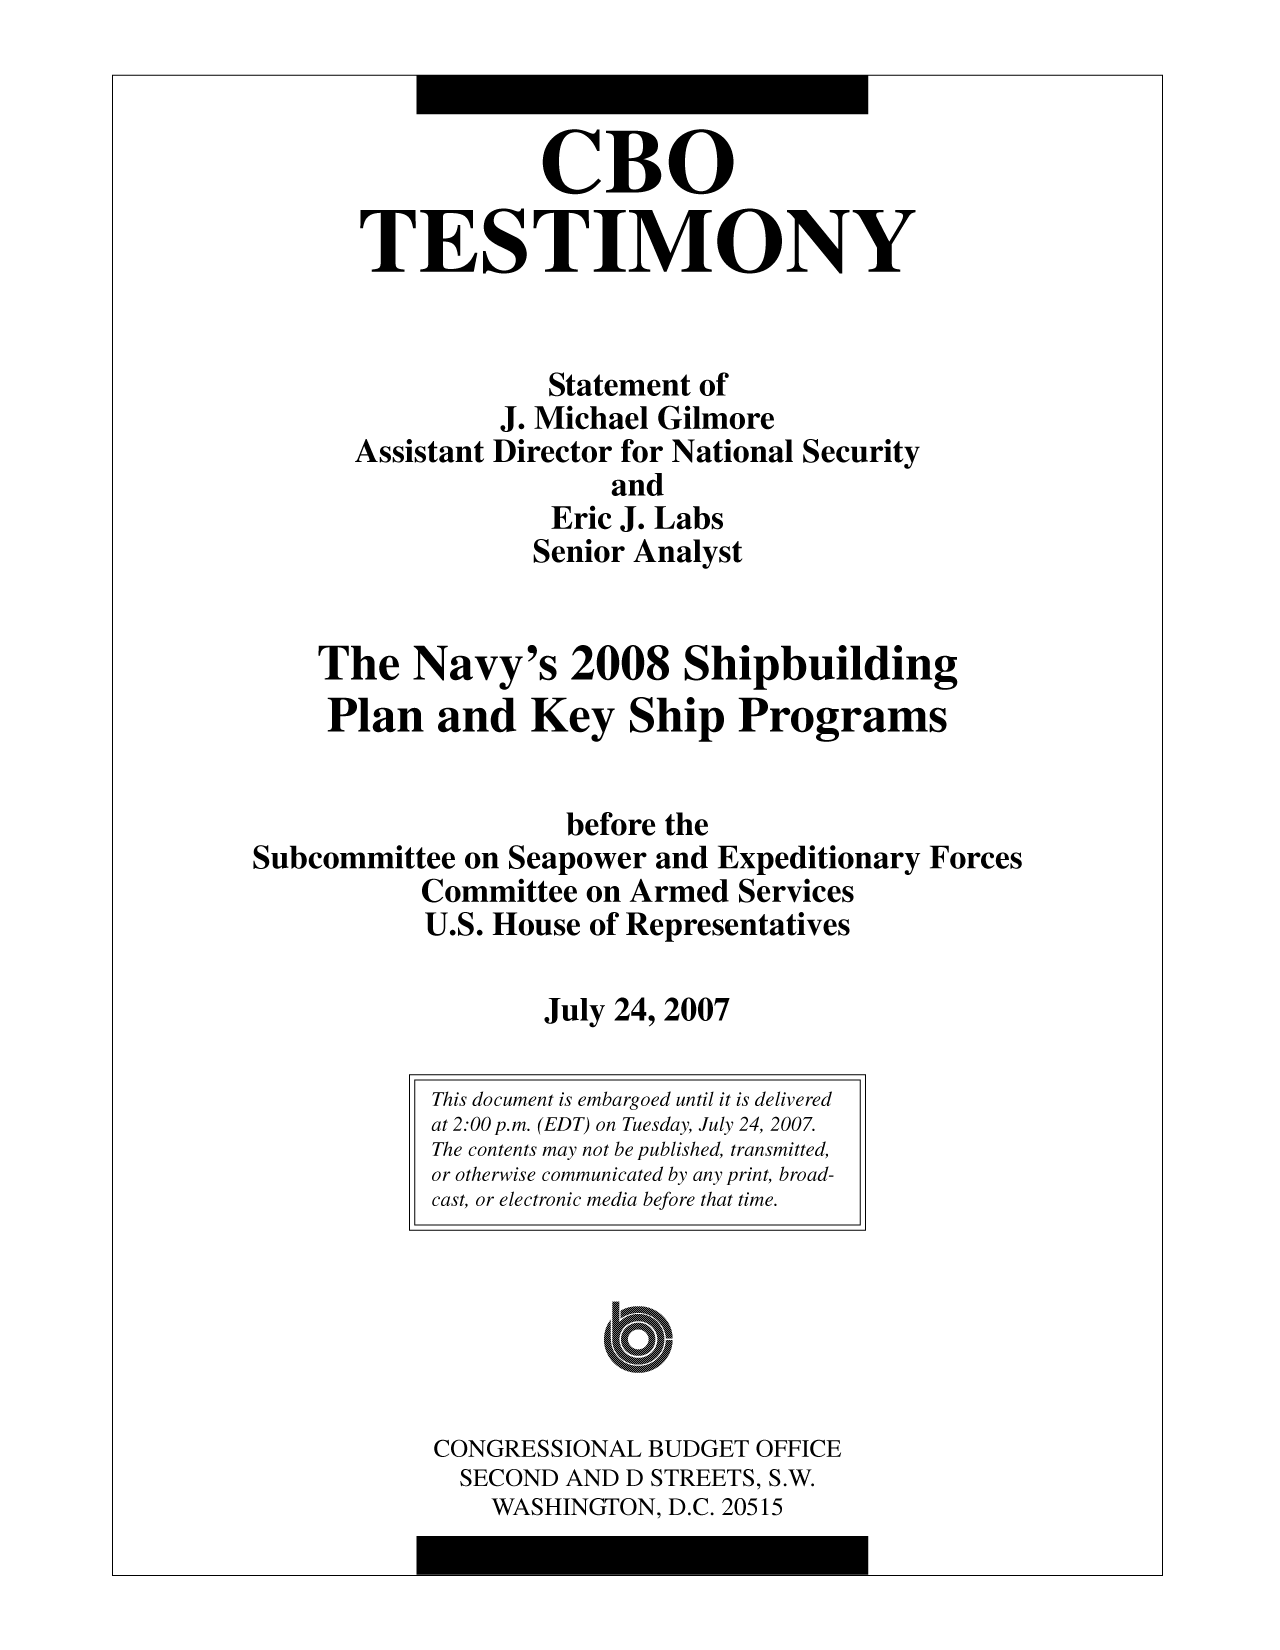 handle is hein.congrec/cbo10037 and id is 1 raw text is: CBO
TESTIMONY
Statement of
J. Michael Gilmore
Assistant Director for National Security
and
Eric J. Labs
Senior Analyst
The Navy's 2008 Shipbuilding
Plan and Key Ship Programs
before the
Subcommittee on Seapower and Expeditionary Forces
Committee on Armed Services
U.S. House of Representatives
July 24, 2007

This document is embargoed until it is delivered
at 2:00 p.m. (EDT) on Tuesday, July 24, 2007.
The contents may not be published, transmitted,
or otherwise communicated by any print, broad-
cast, or electronic media before that time.
CONGRESSIONAL BUDGET OFFICE
SECOND AND D STREETS, S.W.
WASHINGTON, D.C. 20515


